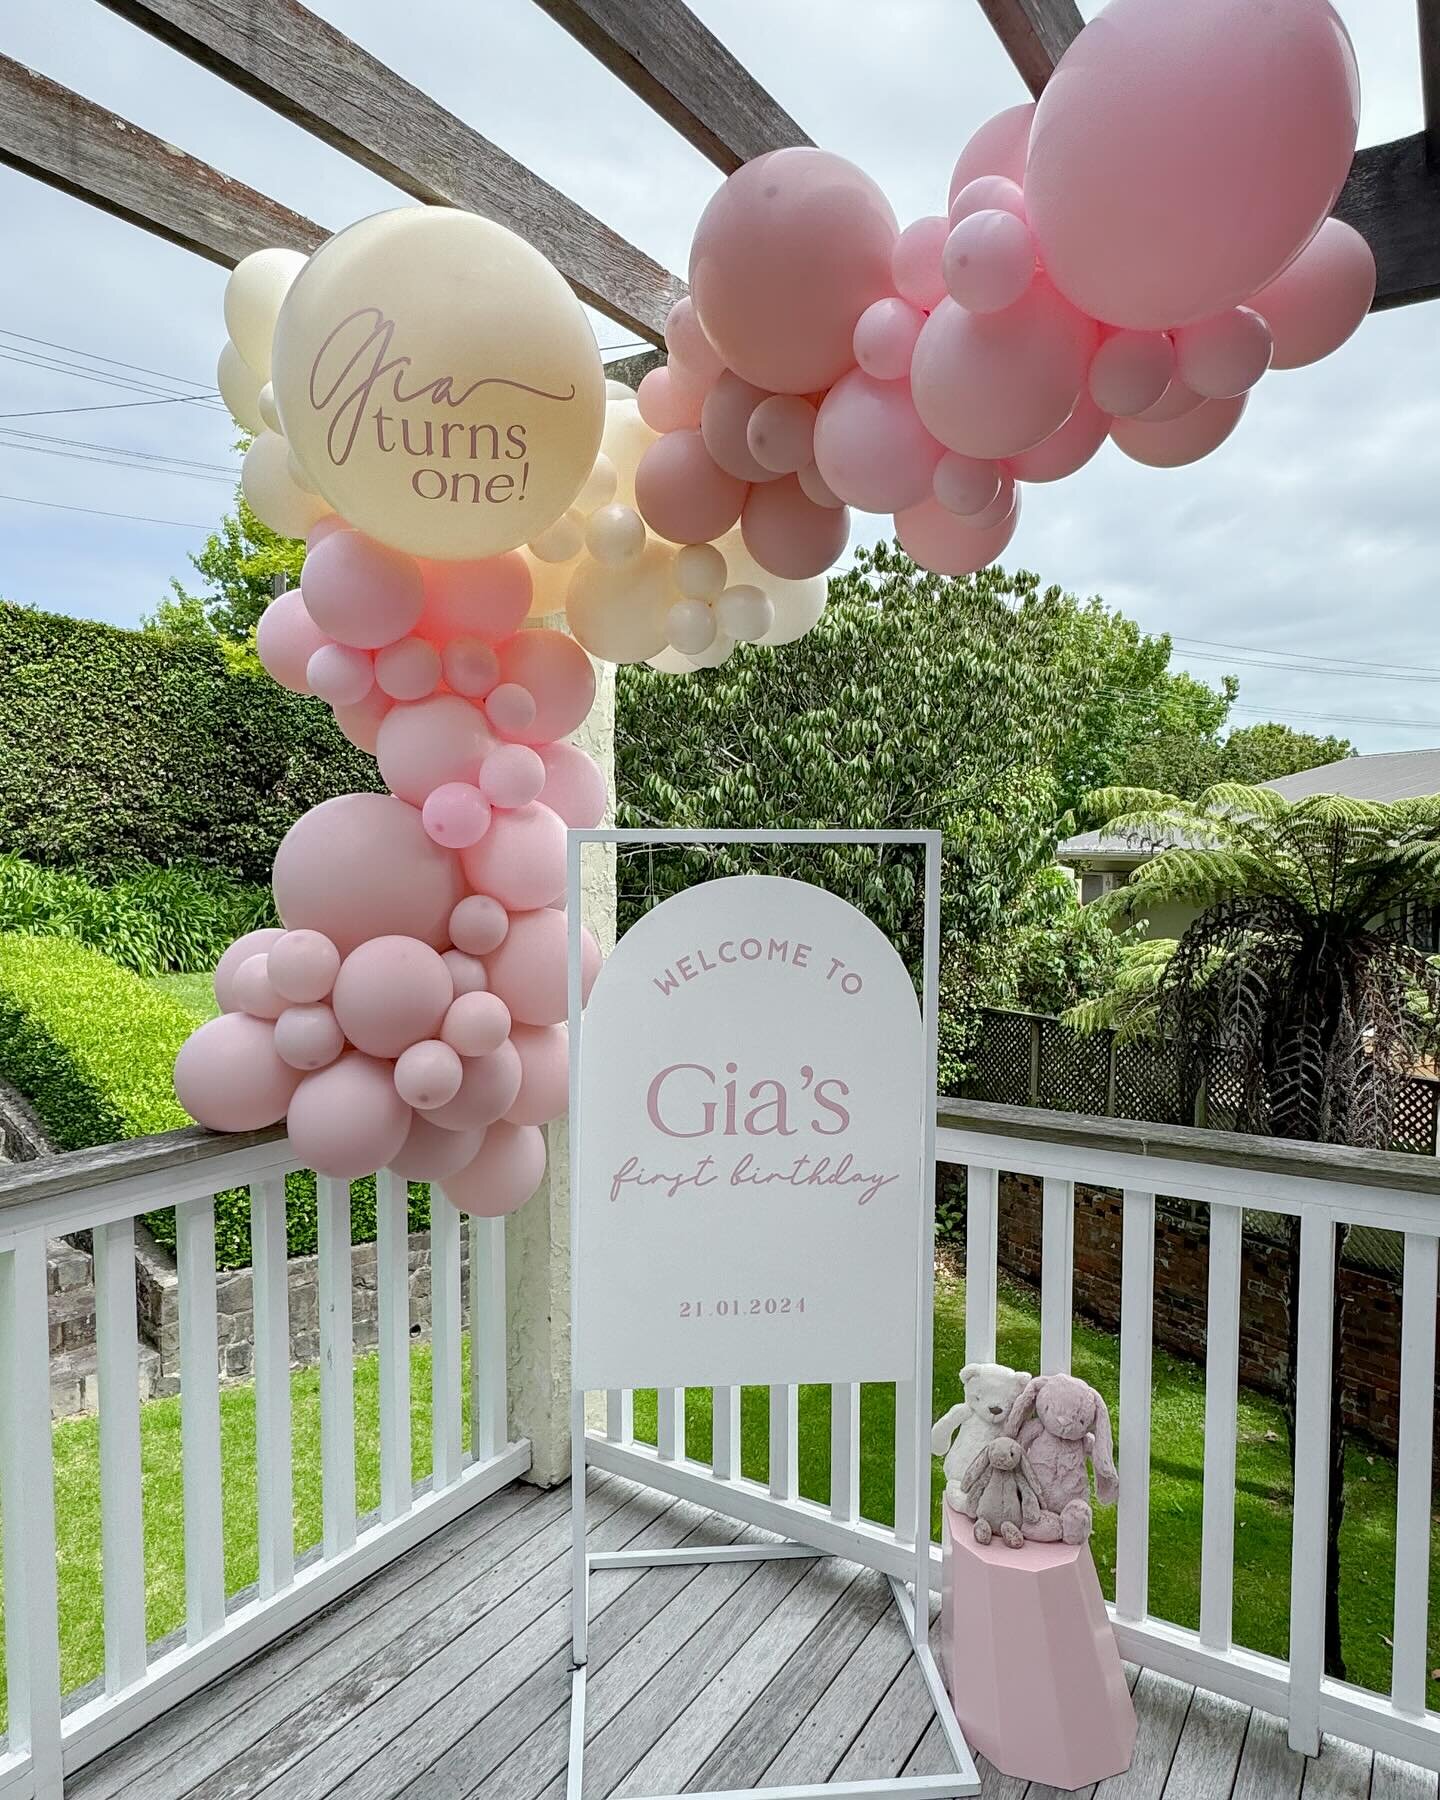 Gorgeous details for Gia&rsquo;s 1st birthday 🩷

Shades of Pink and Cream balloons with a custom personalised balloon. 
Sometimes all you need is a gorgeous personalised garland without backdrops or extras 🙈
Add a signage and stand combo, some gorg